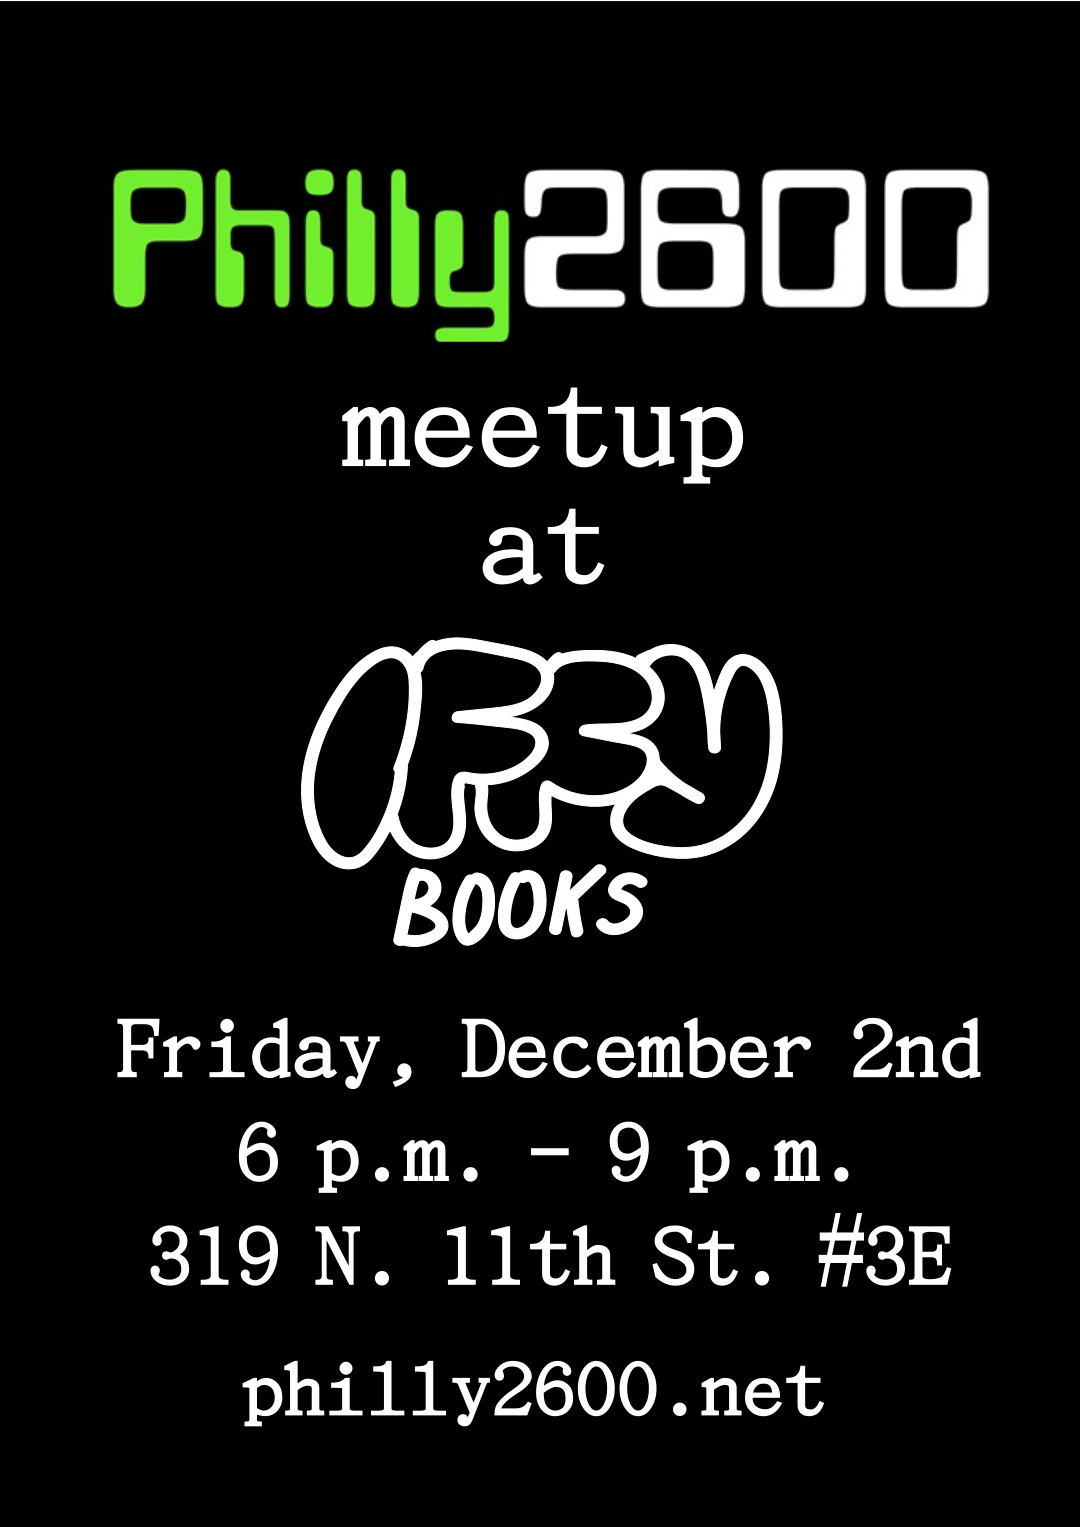 Flyer with the following text on a black background: Philly 2600 meetup at Iffy Books Friday, December 2nd 6 p.m. - 9 p.m. 319 N. 11th St. #3E philly2600.net